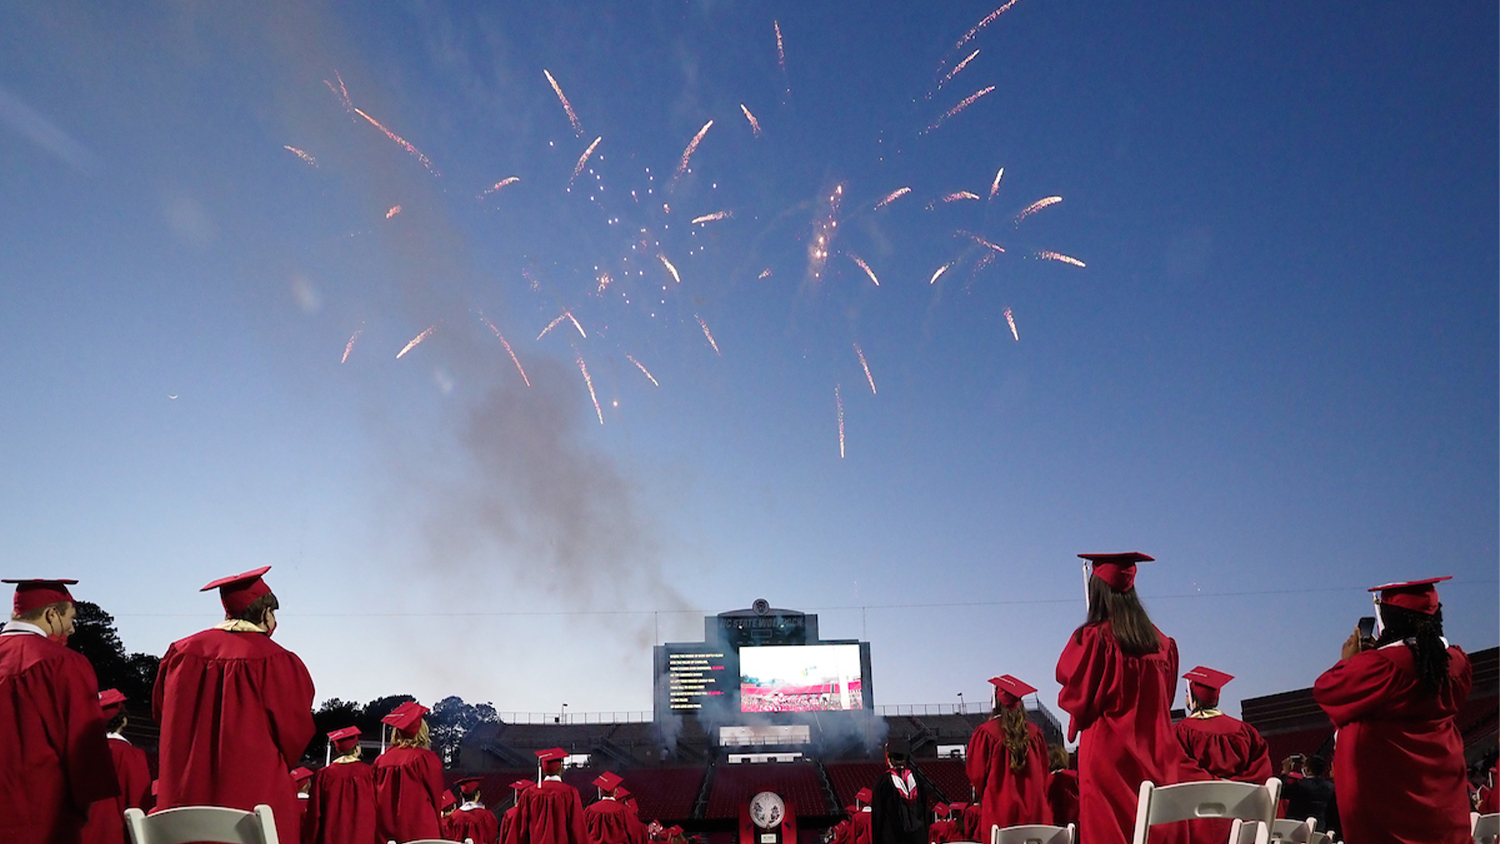 Students in graduation robes watch fireworks at Carter-Finley Stadium during the Spring 2021 Commencement